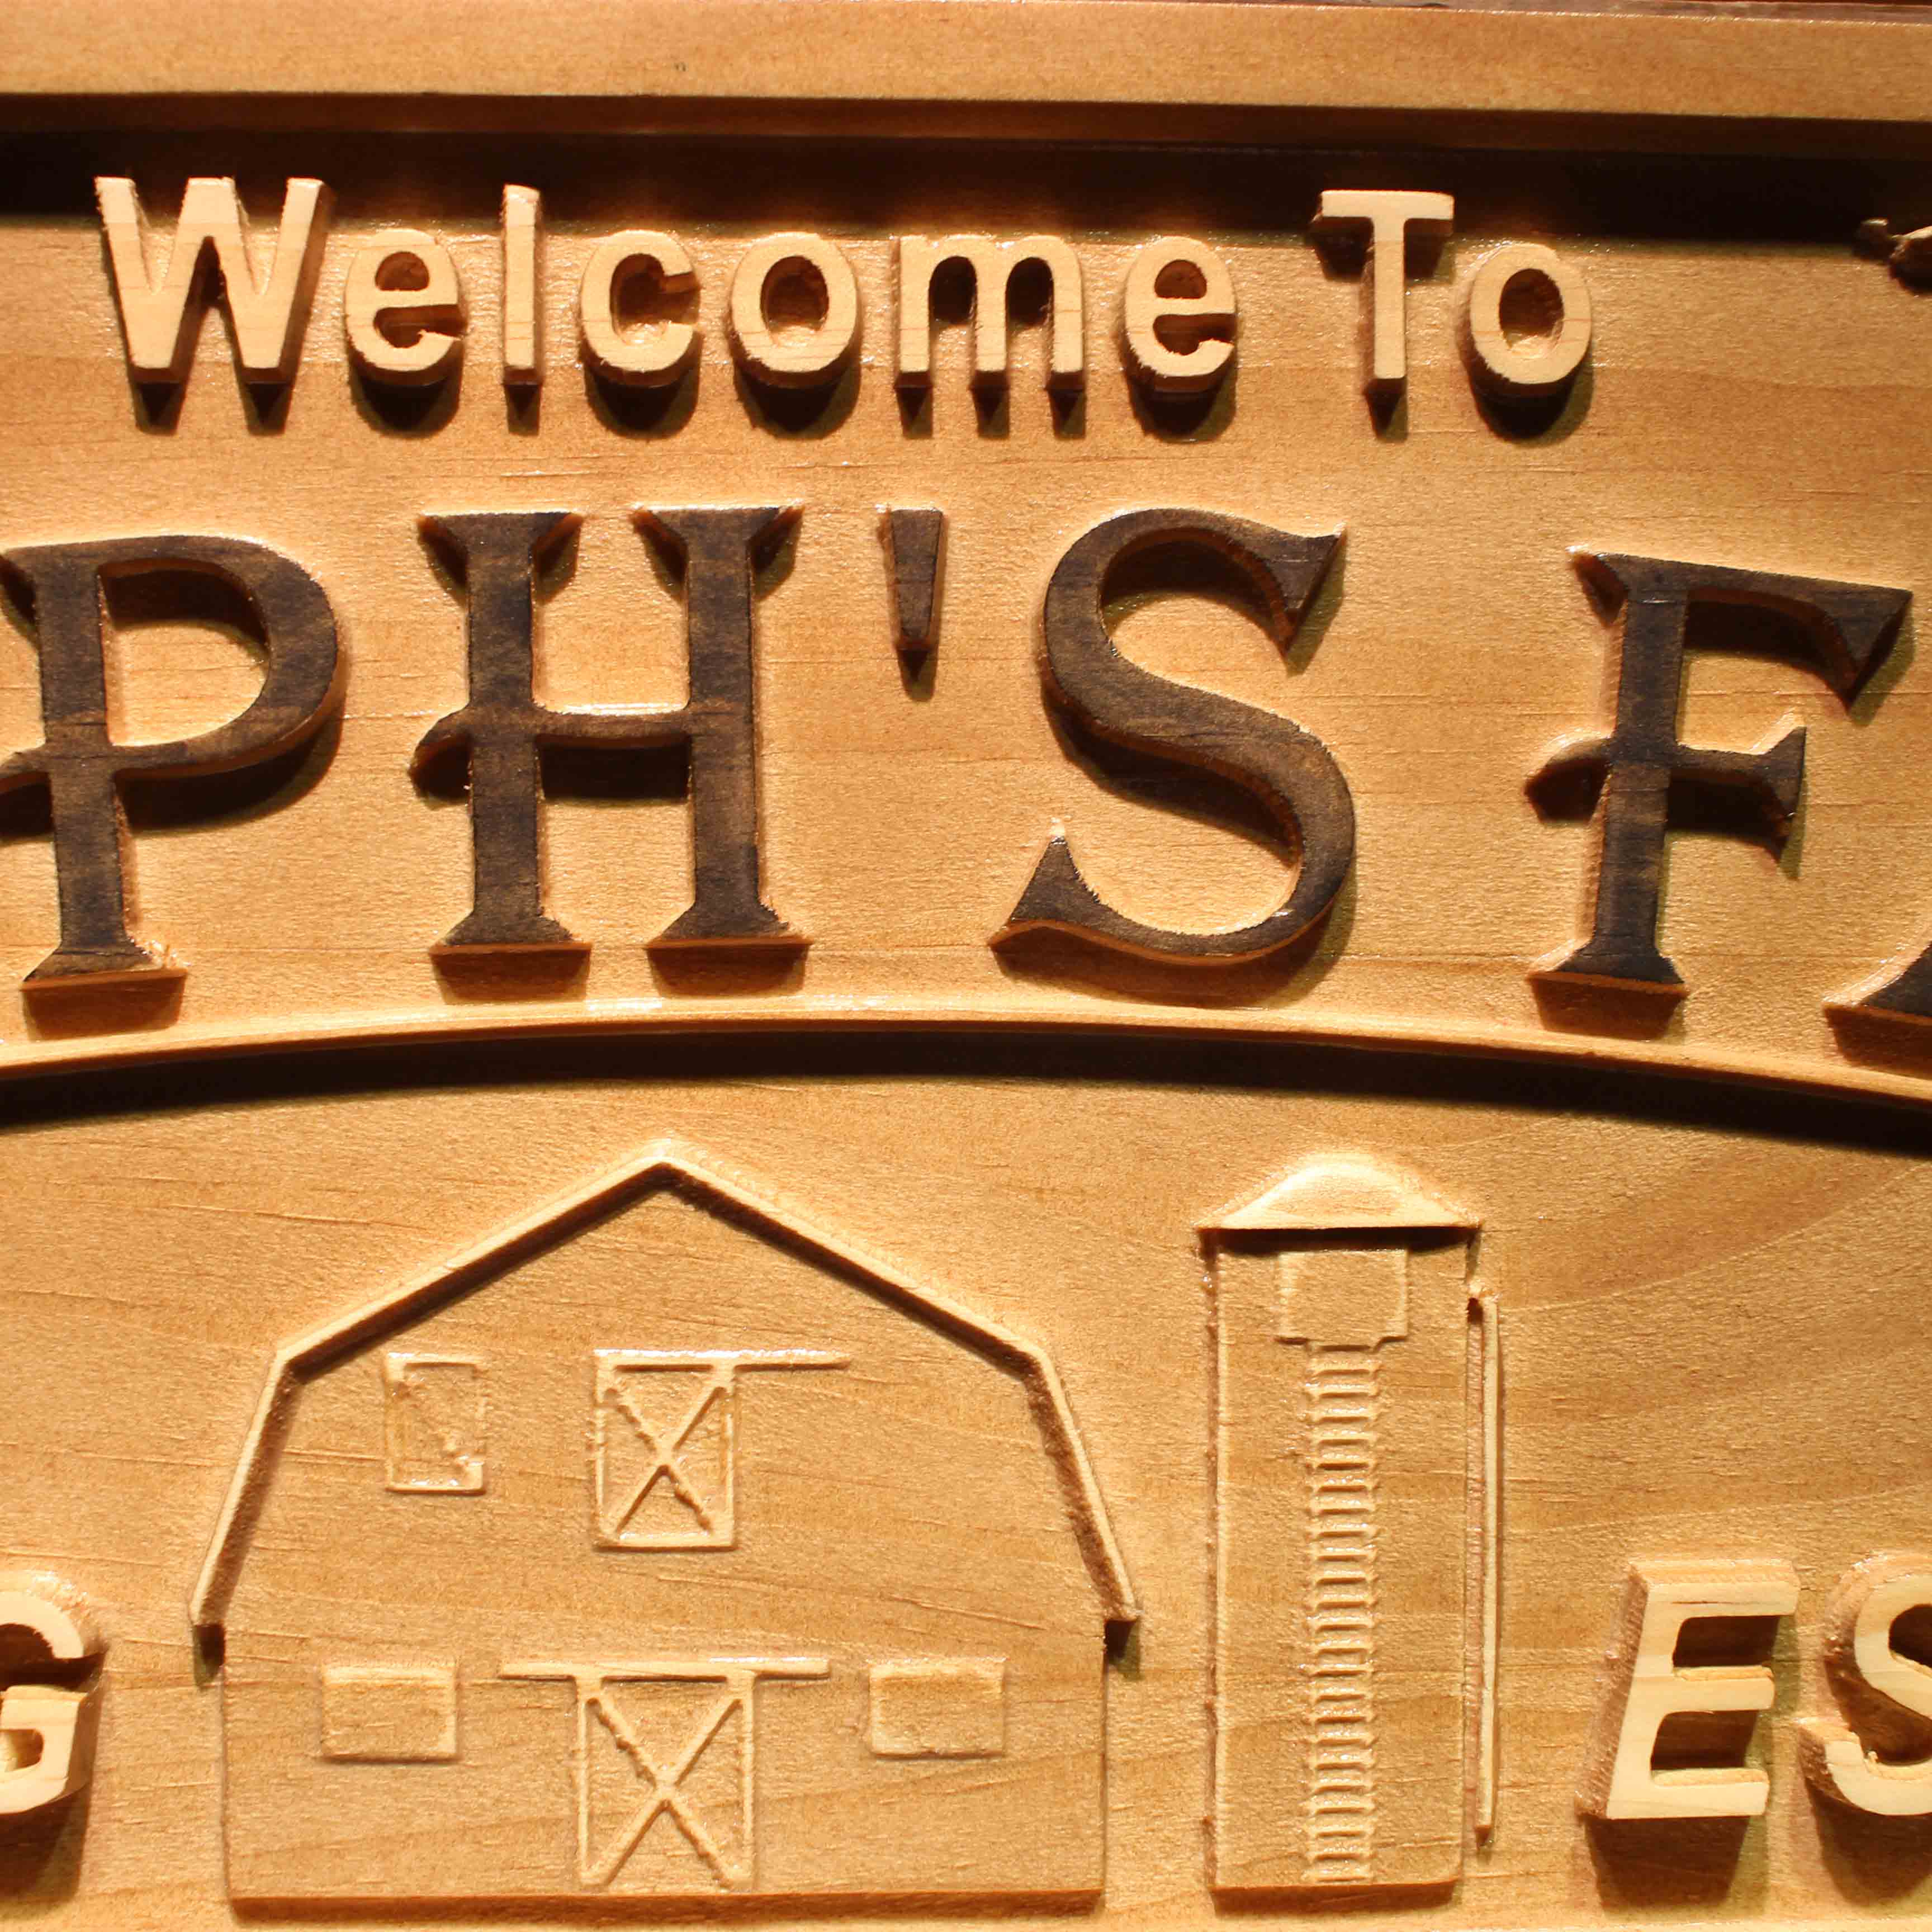 Farm Last Name First Names Personalized Est. Year Housewarming Gifts Wood Engraved Wooden Sign